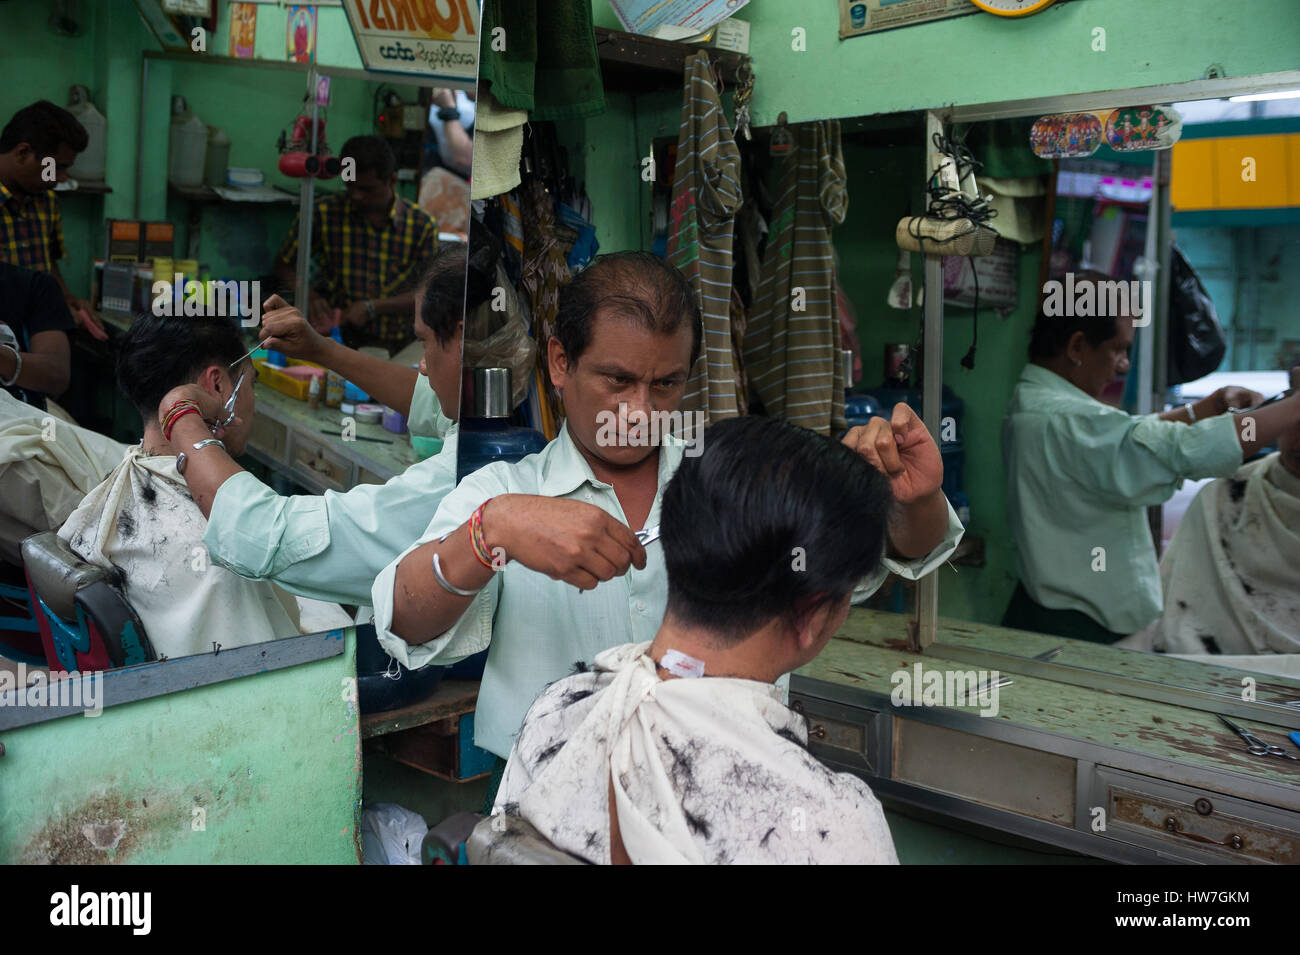 26.01.2017, Yangon, Republic of the Union of Myanmar, Asia - A barber is seen cutting the hair of a client in Yangon. Stock Photo